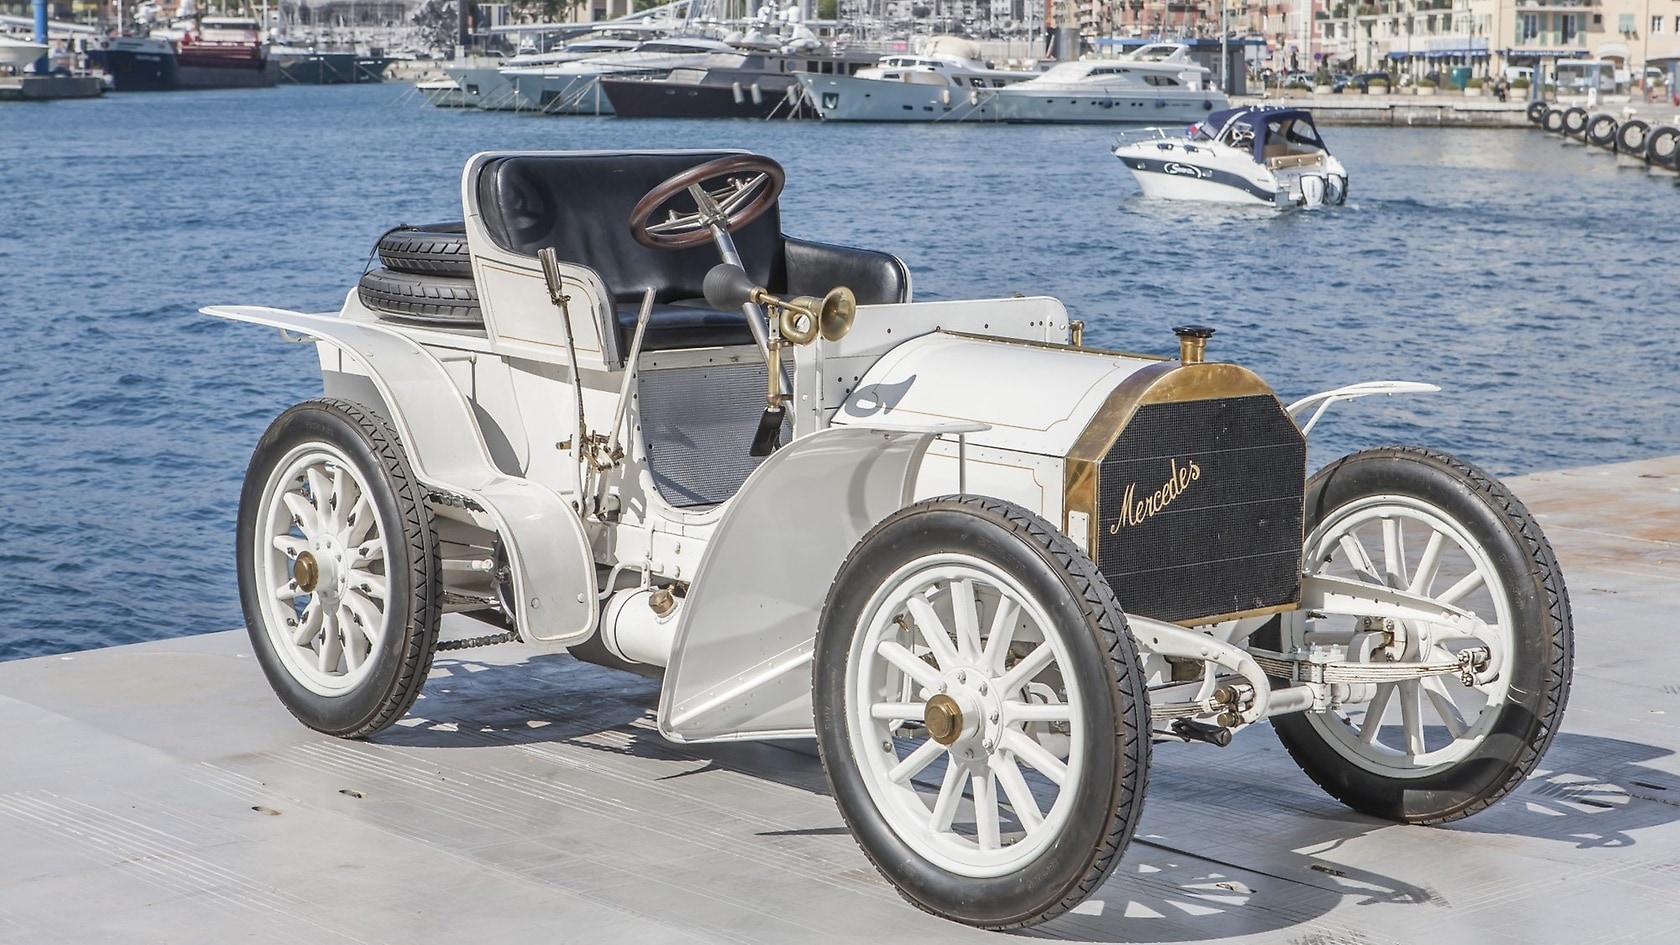 Mercedes-Simplex 40 PS from 1903, photographed by the old harbour in Nice.